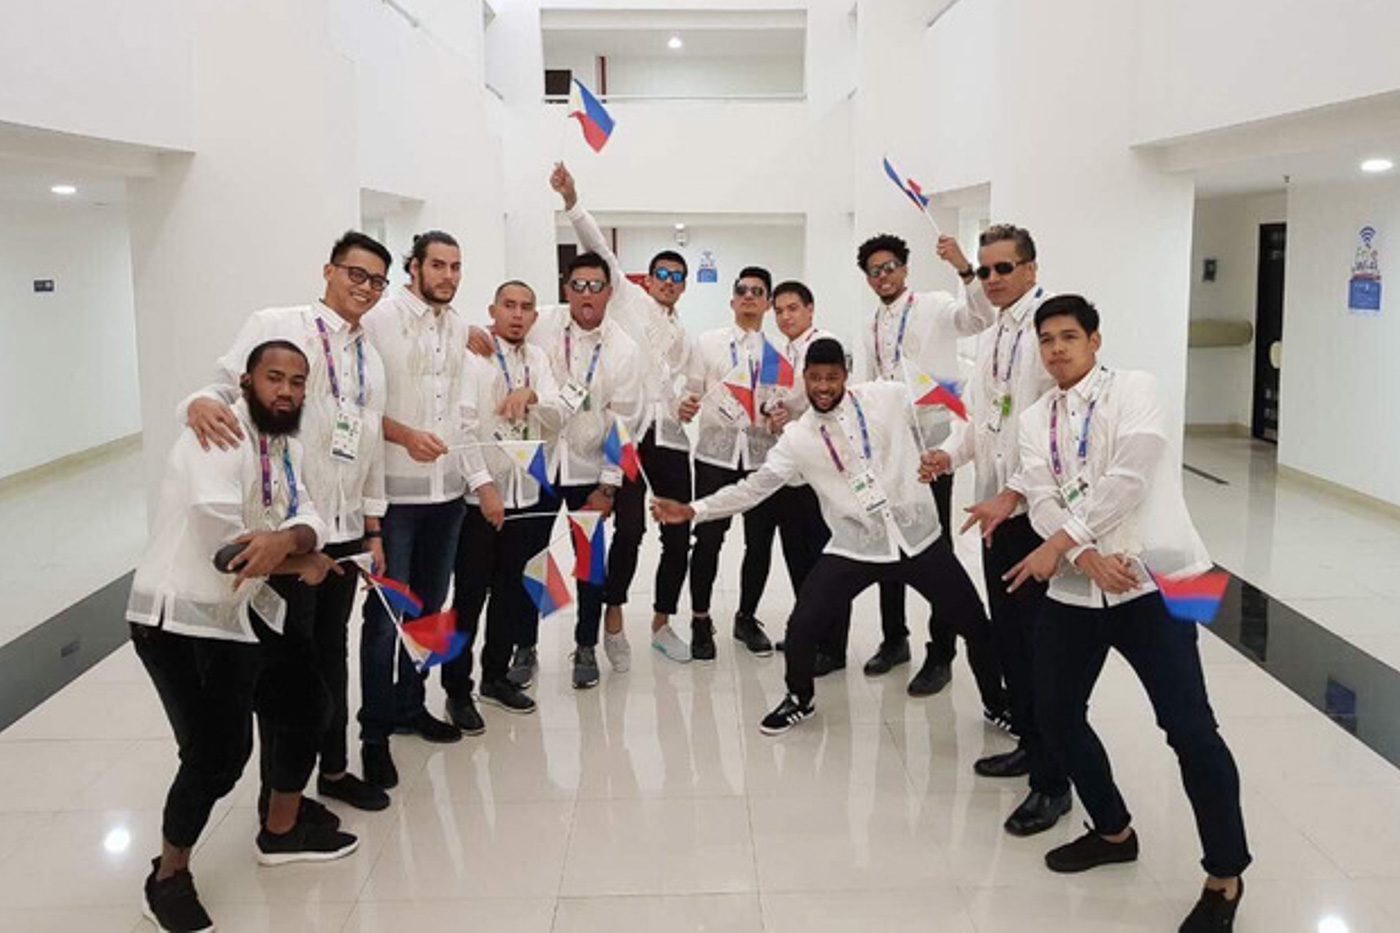 ALL SET. The Philippine men's basketball squad in barong Tagalog prepare to join the national team in the athletes' parade for the opening of the 2018 Asian Games. Photo courtesy of Ryan Gregorio   